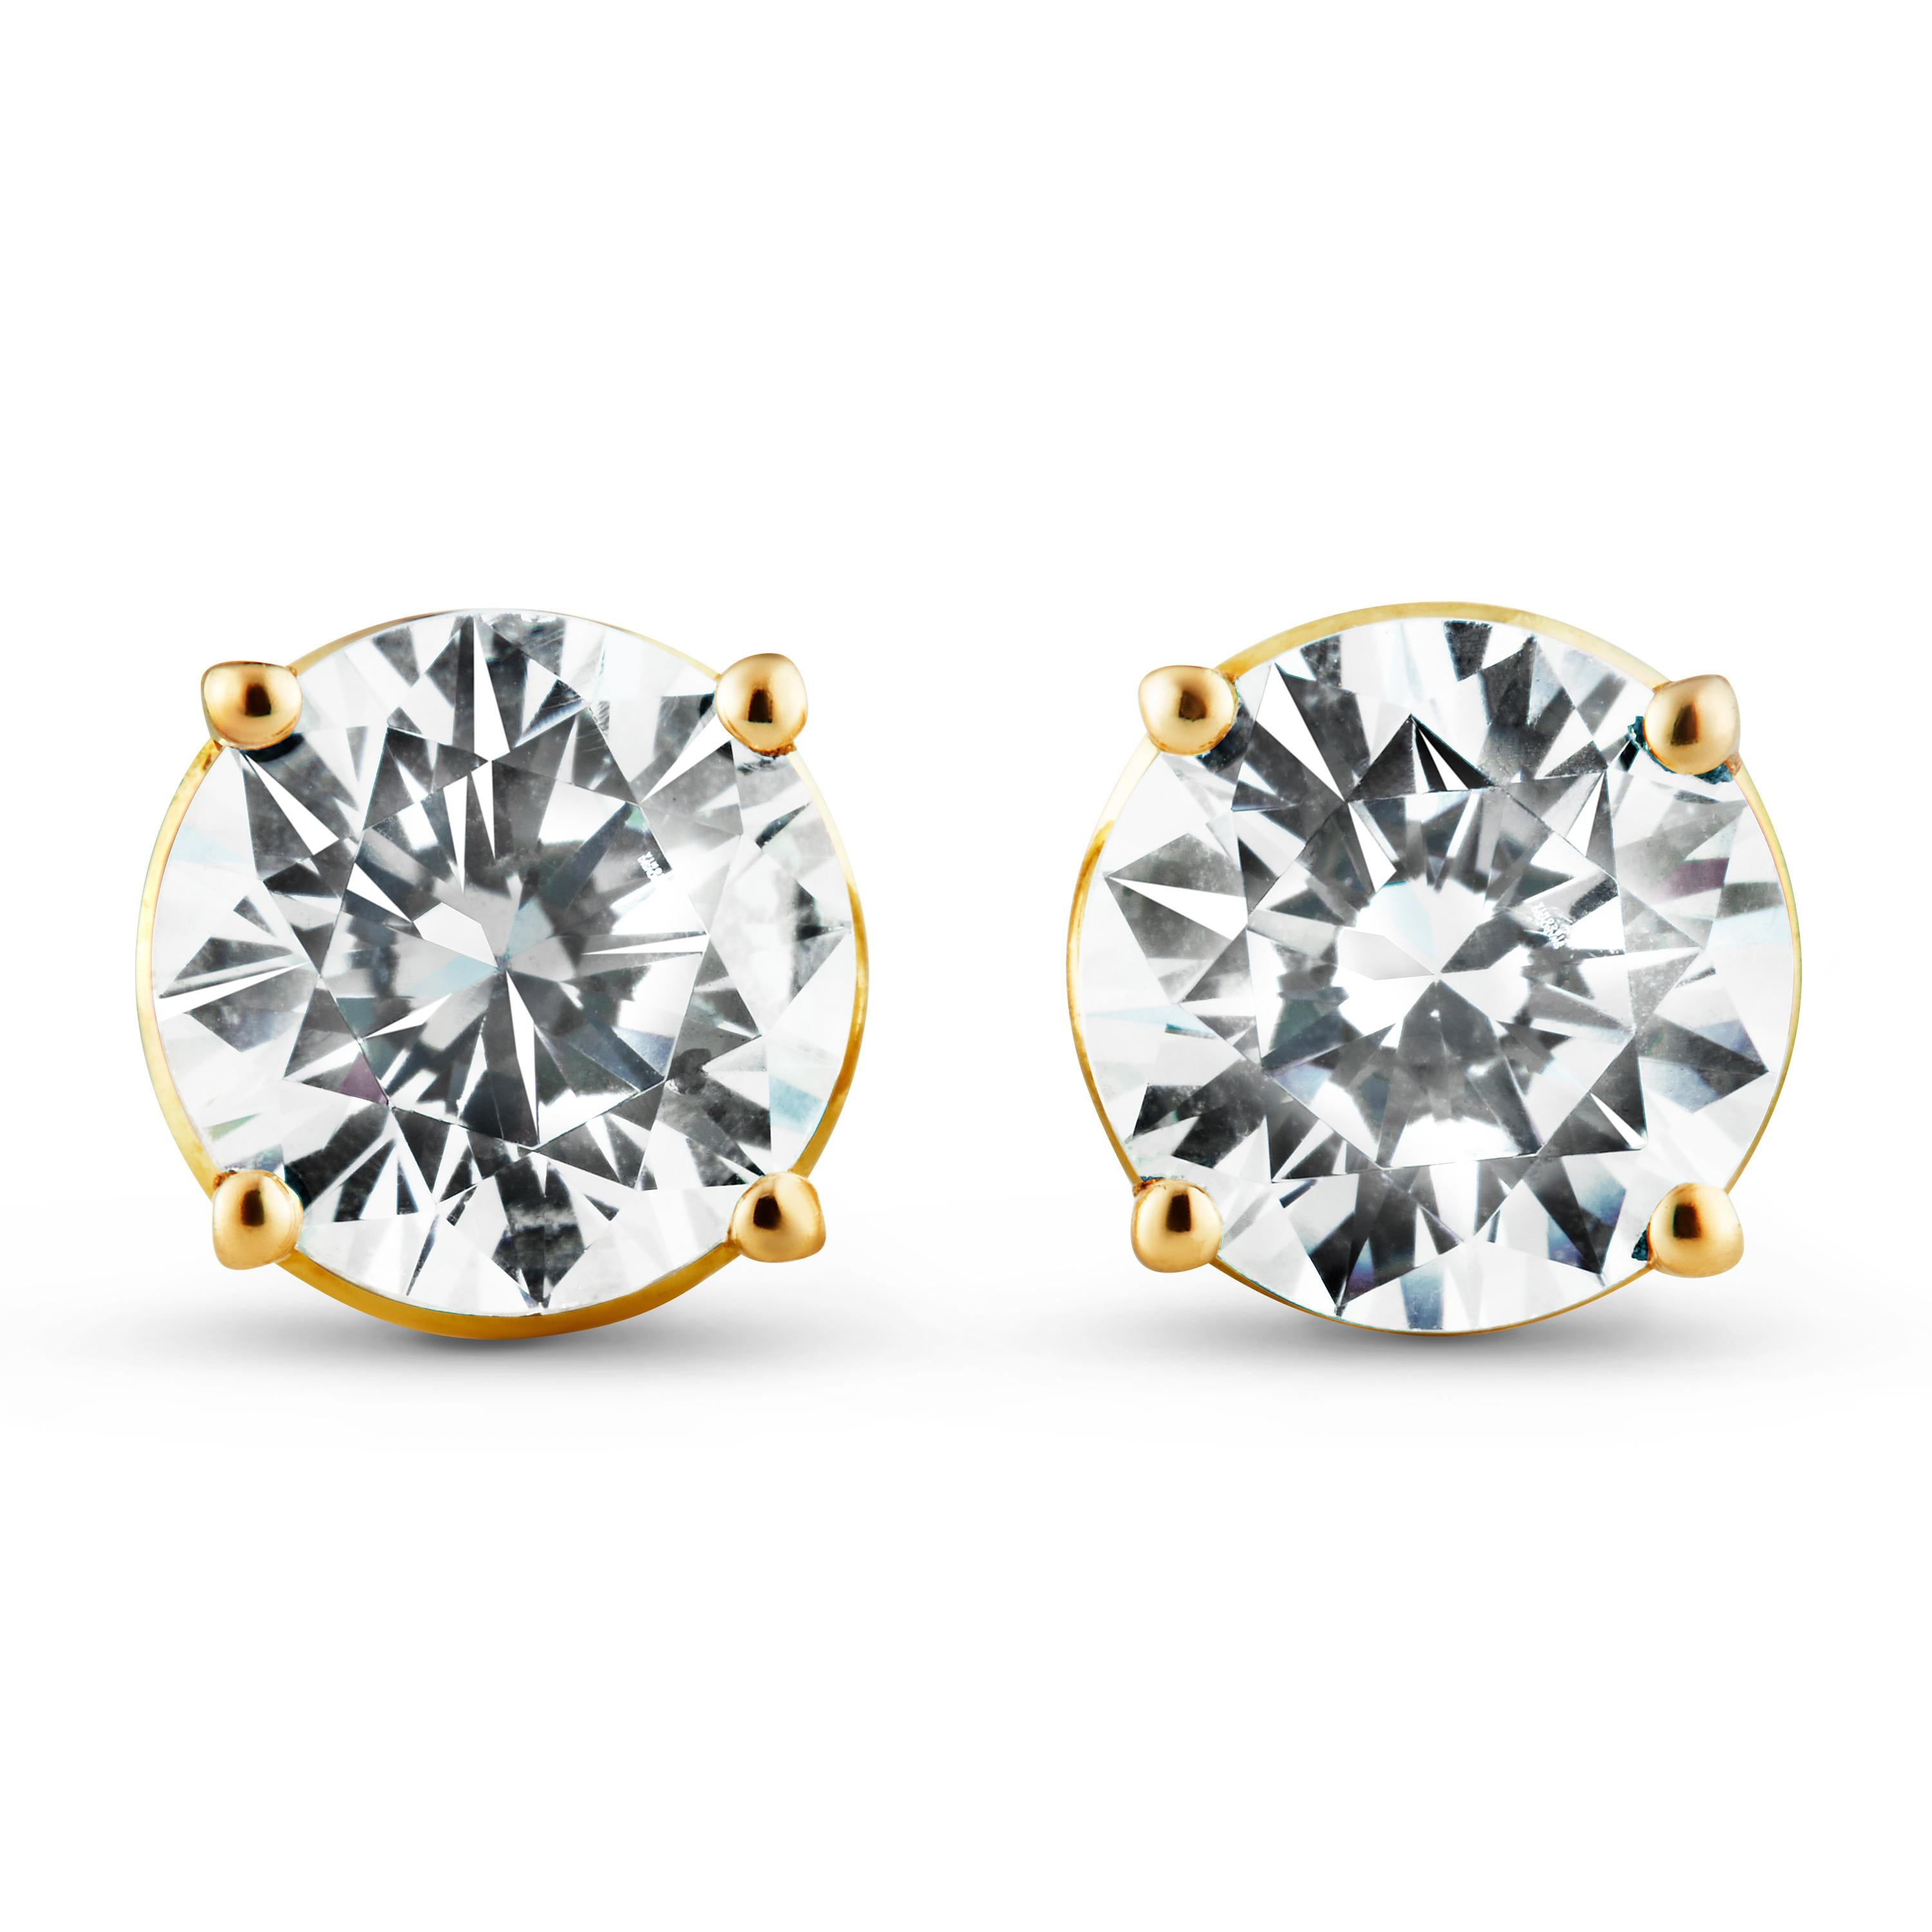 The No.1 Solitaire ear studs are designed to maximise the brilliance and luminosity of the diamonds. 

Our distinctive halo is carefully engineered to elevate the diamond, emphasizing its size while strengthening and protecting the stone’s